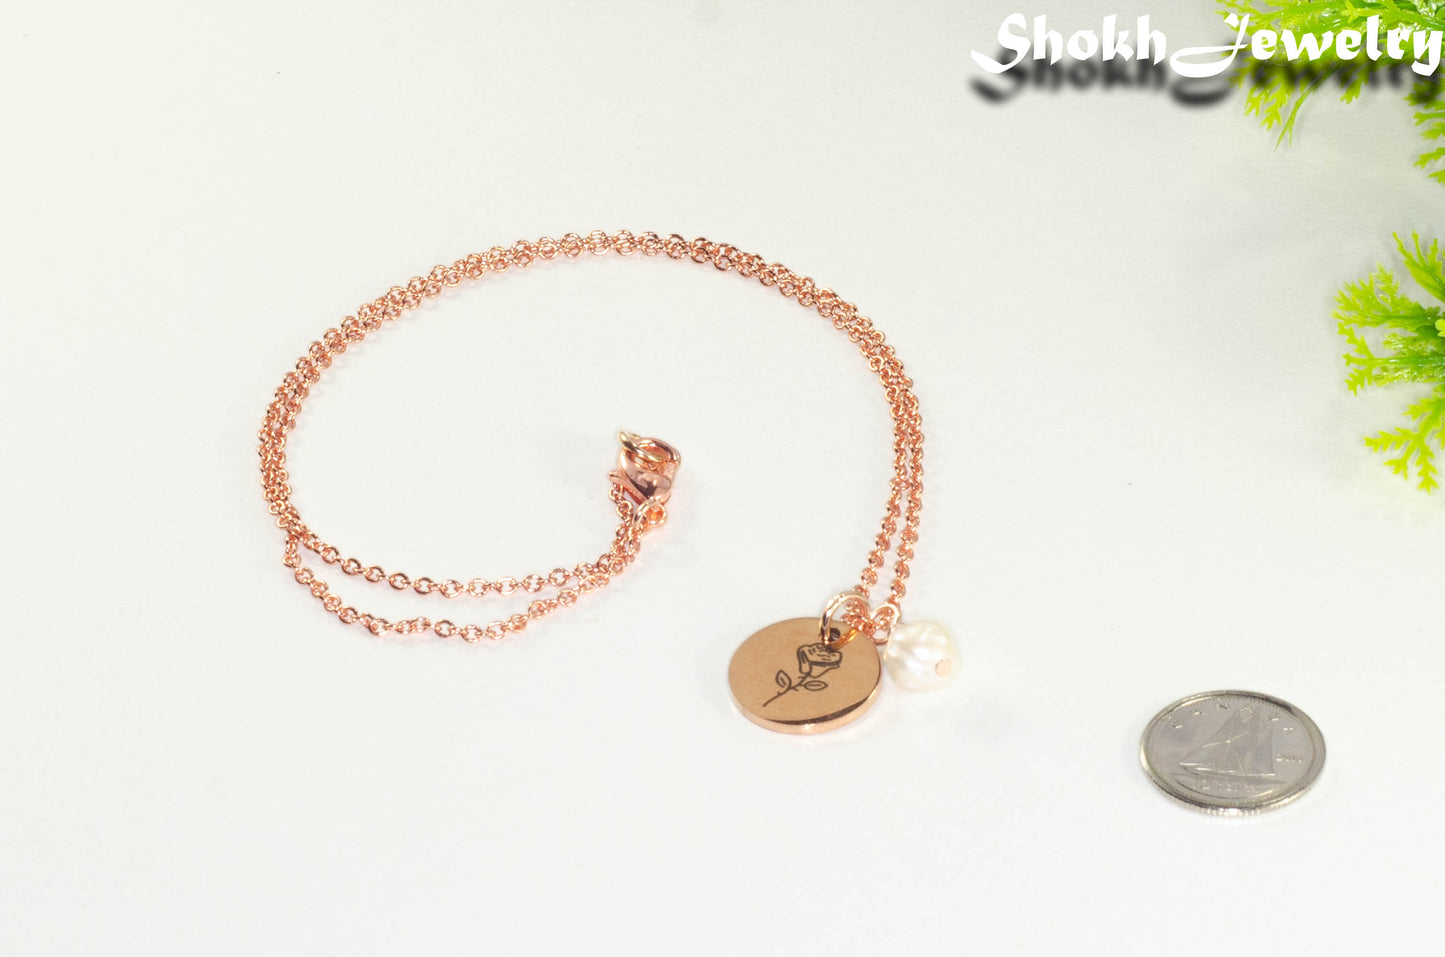 Rose Gold Plated June Birth Flower Necklace with Freshwater Pearl Pendant beside a dime.